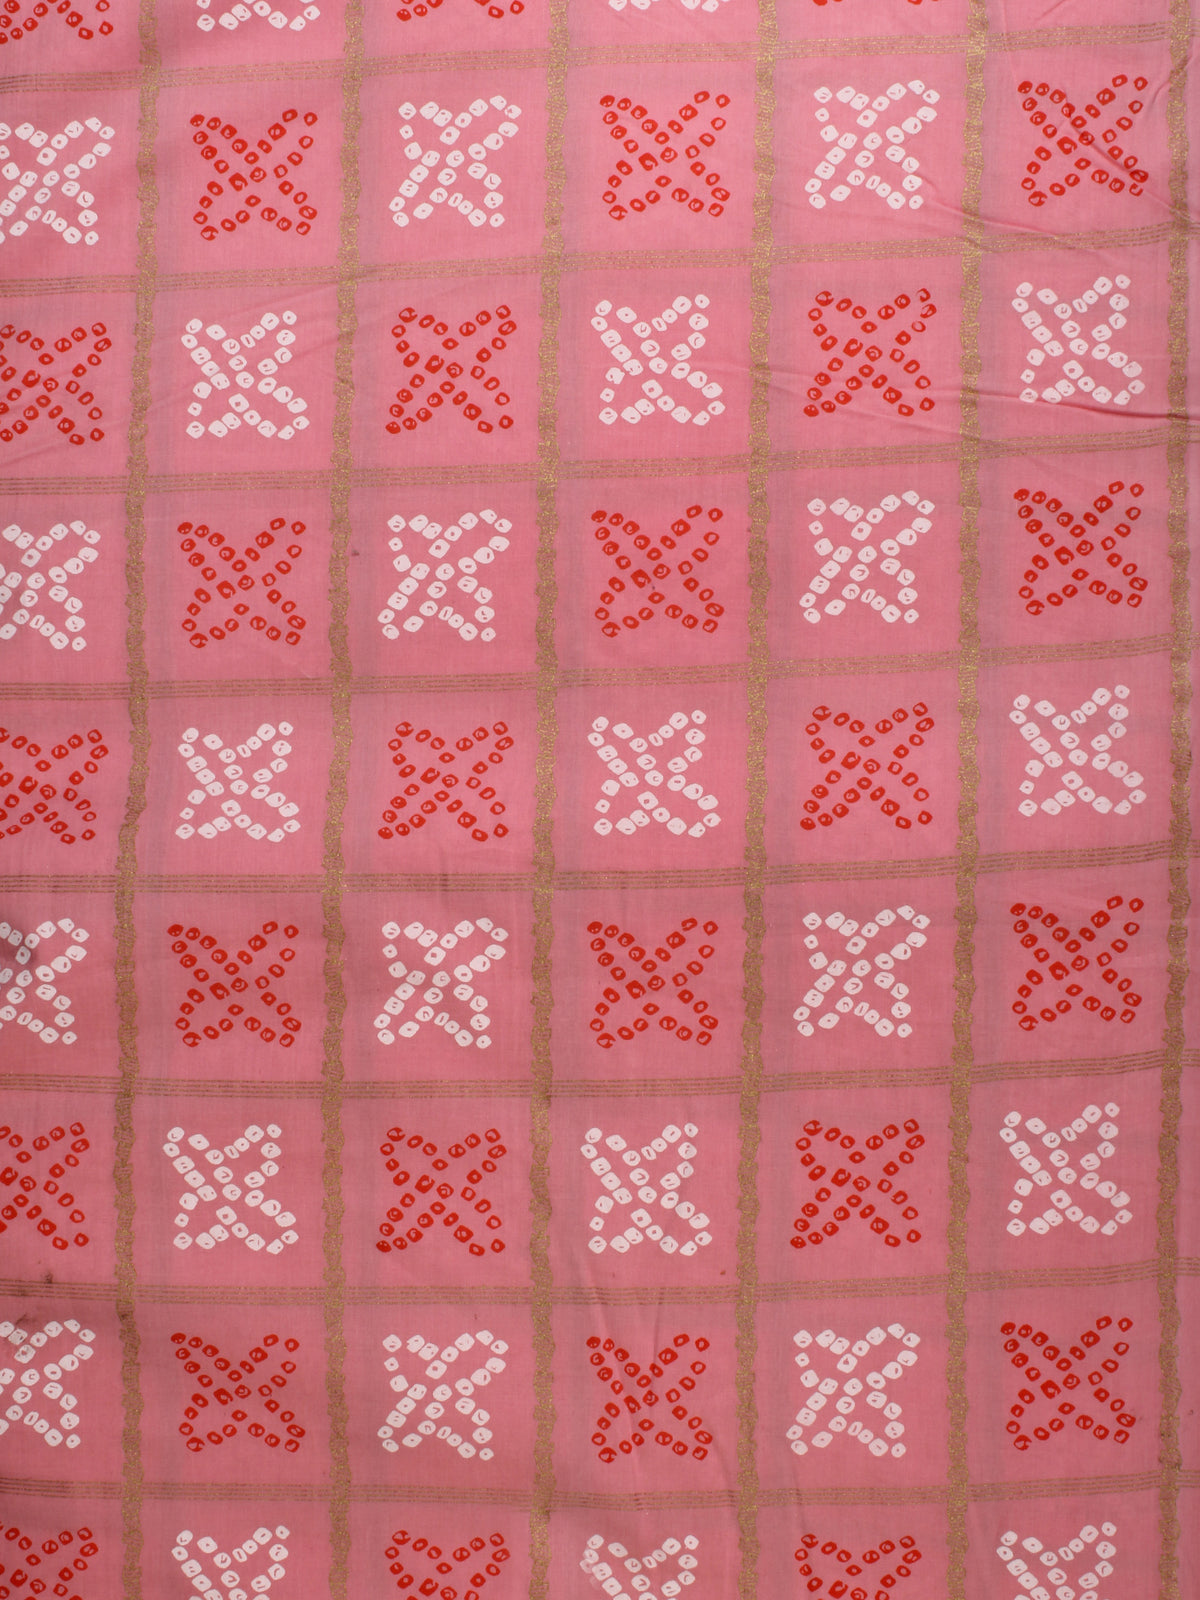 Pink Red White Block Printed Cotton Fabric Per Meter - F001F2205